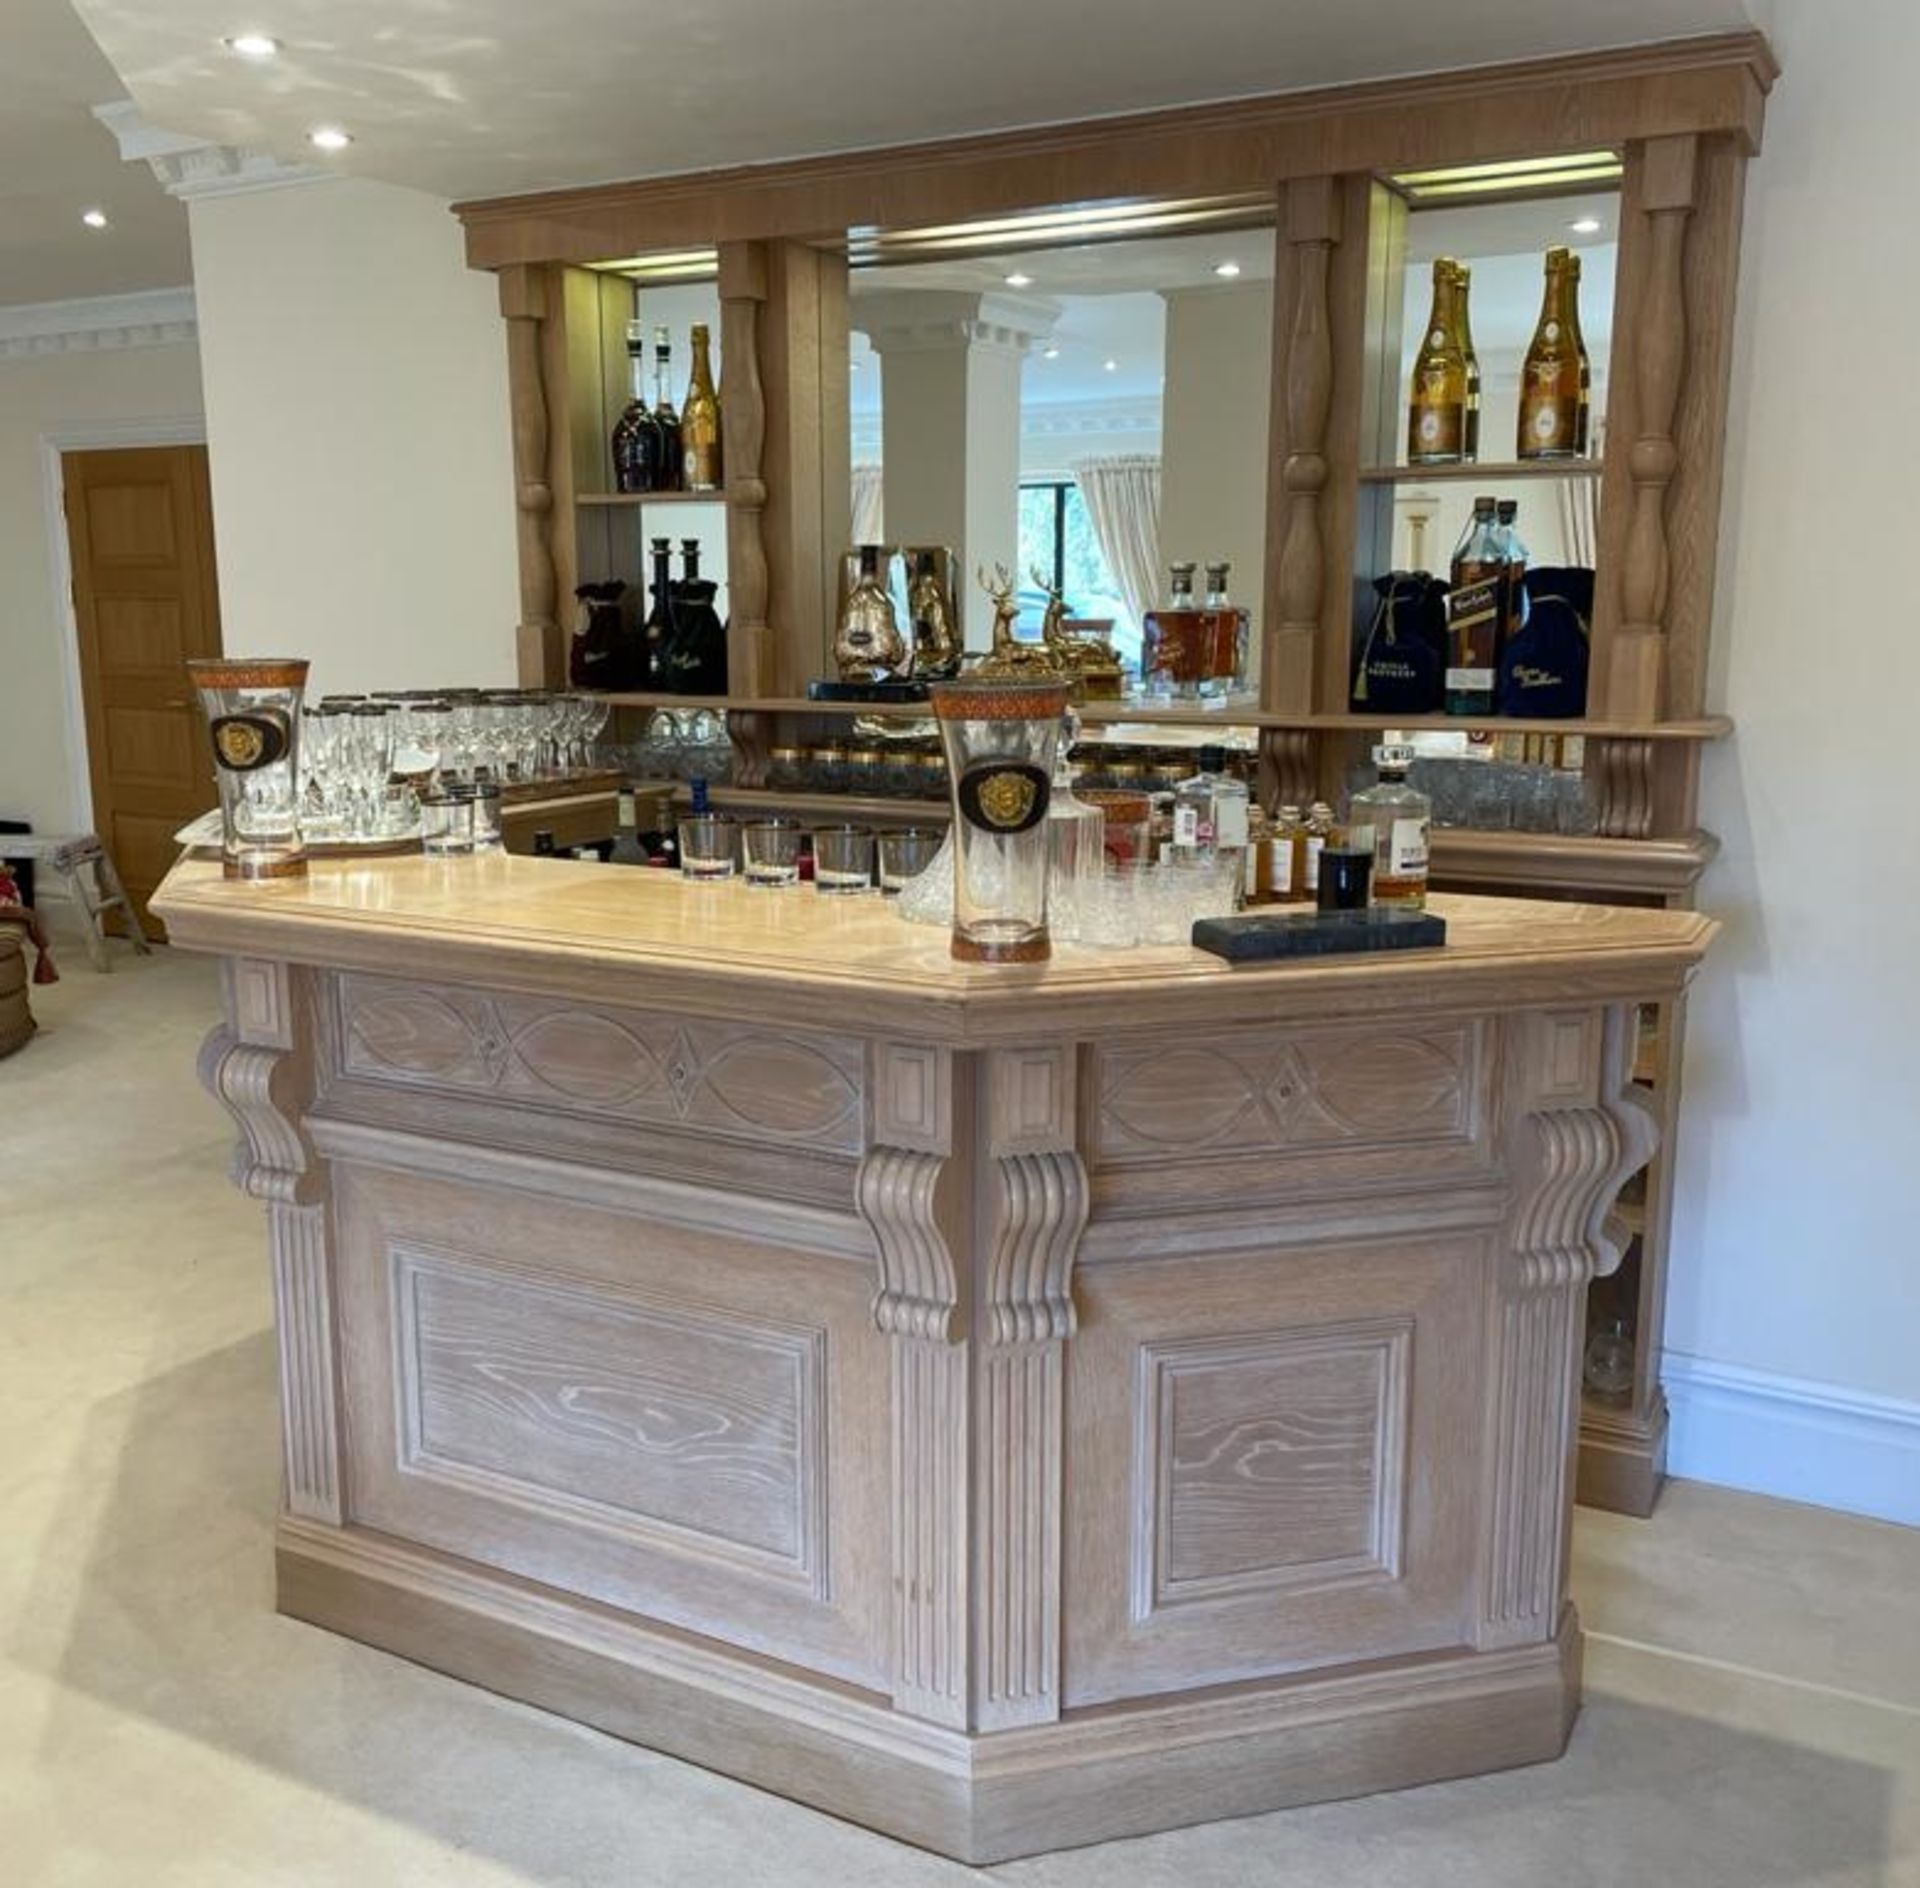 1 x Bespoke Solid Beech Home Bar With Backbar - Beautifully Crafted With Panelling and Curved